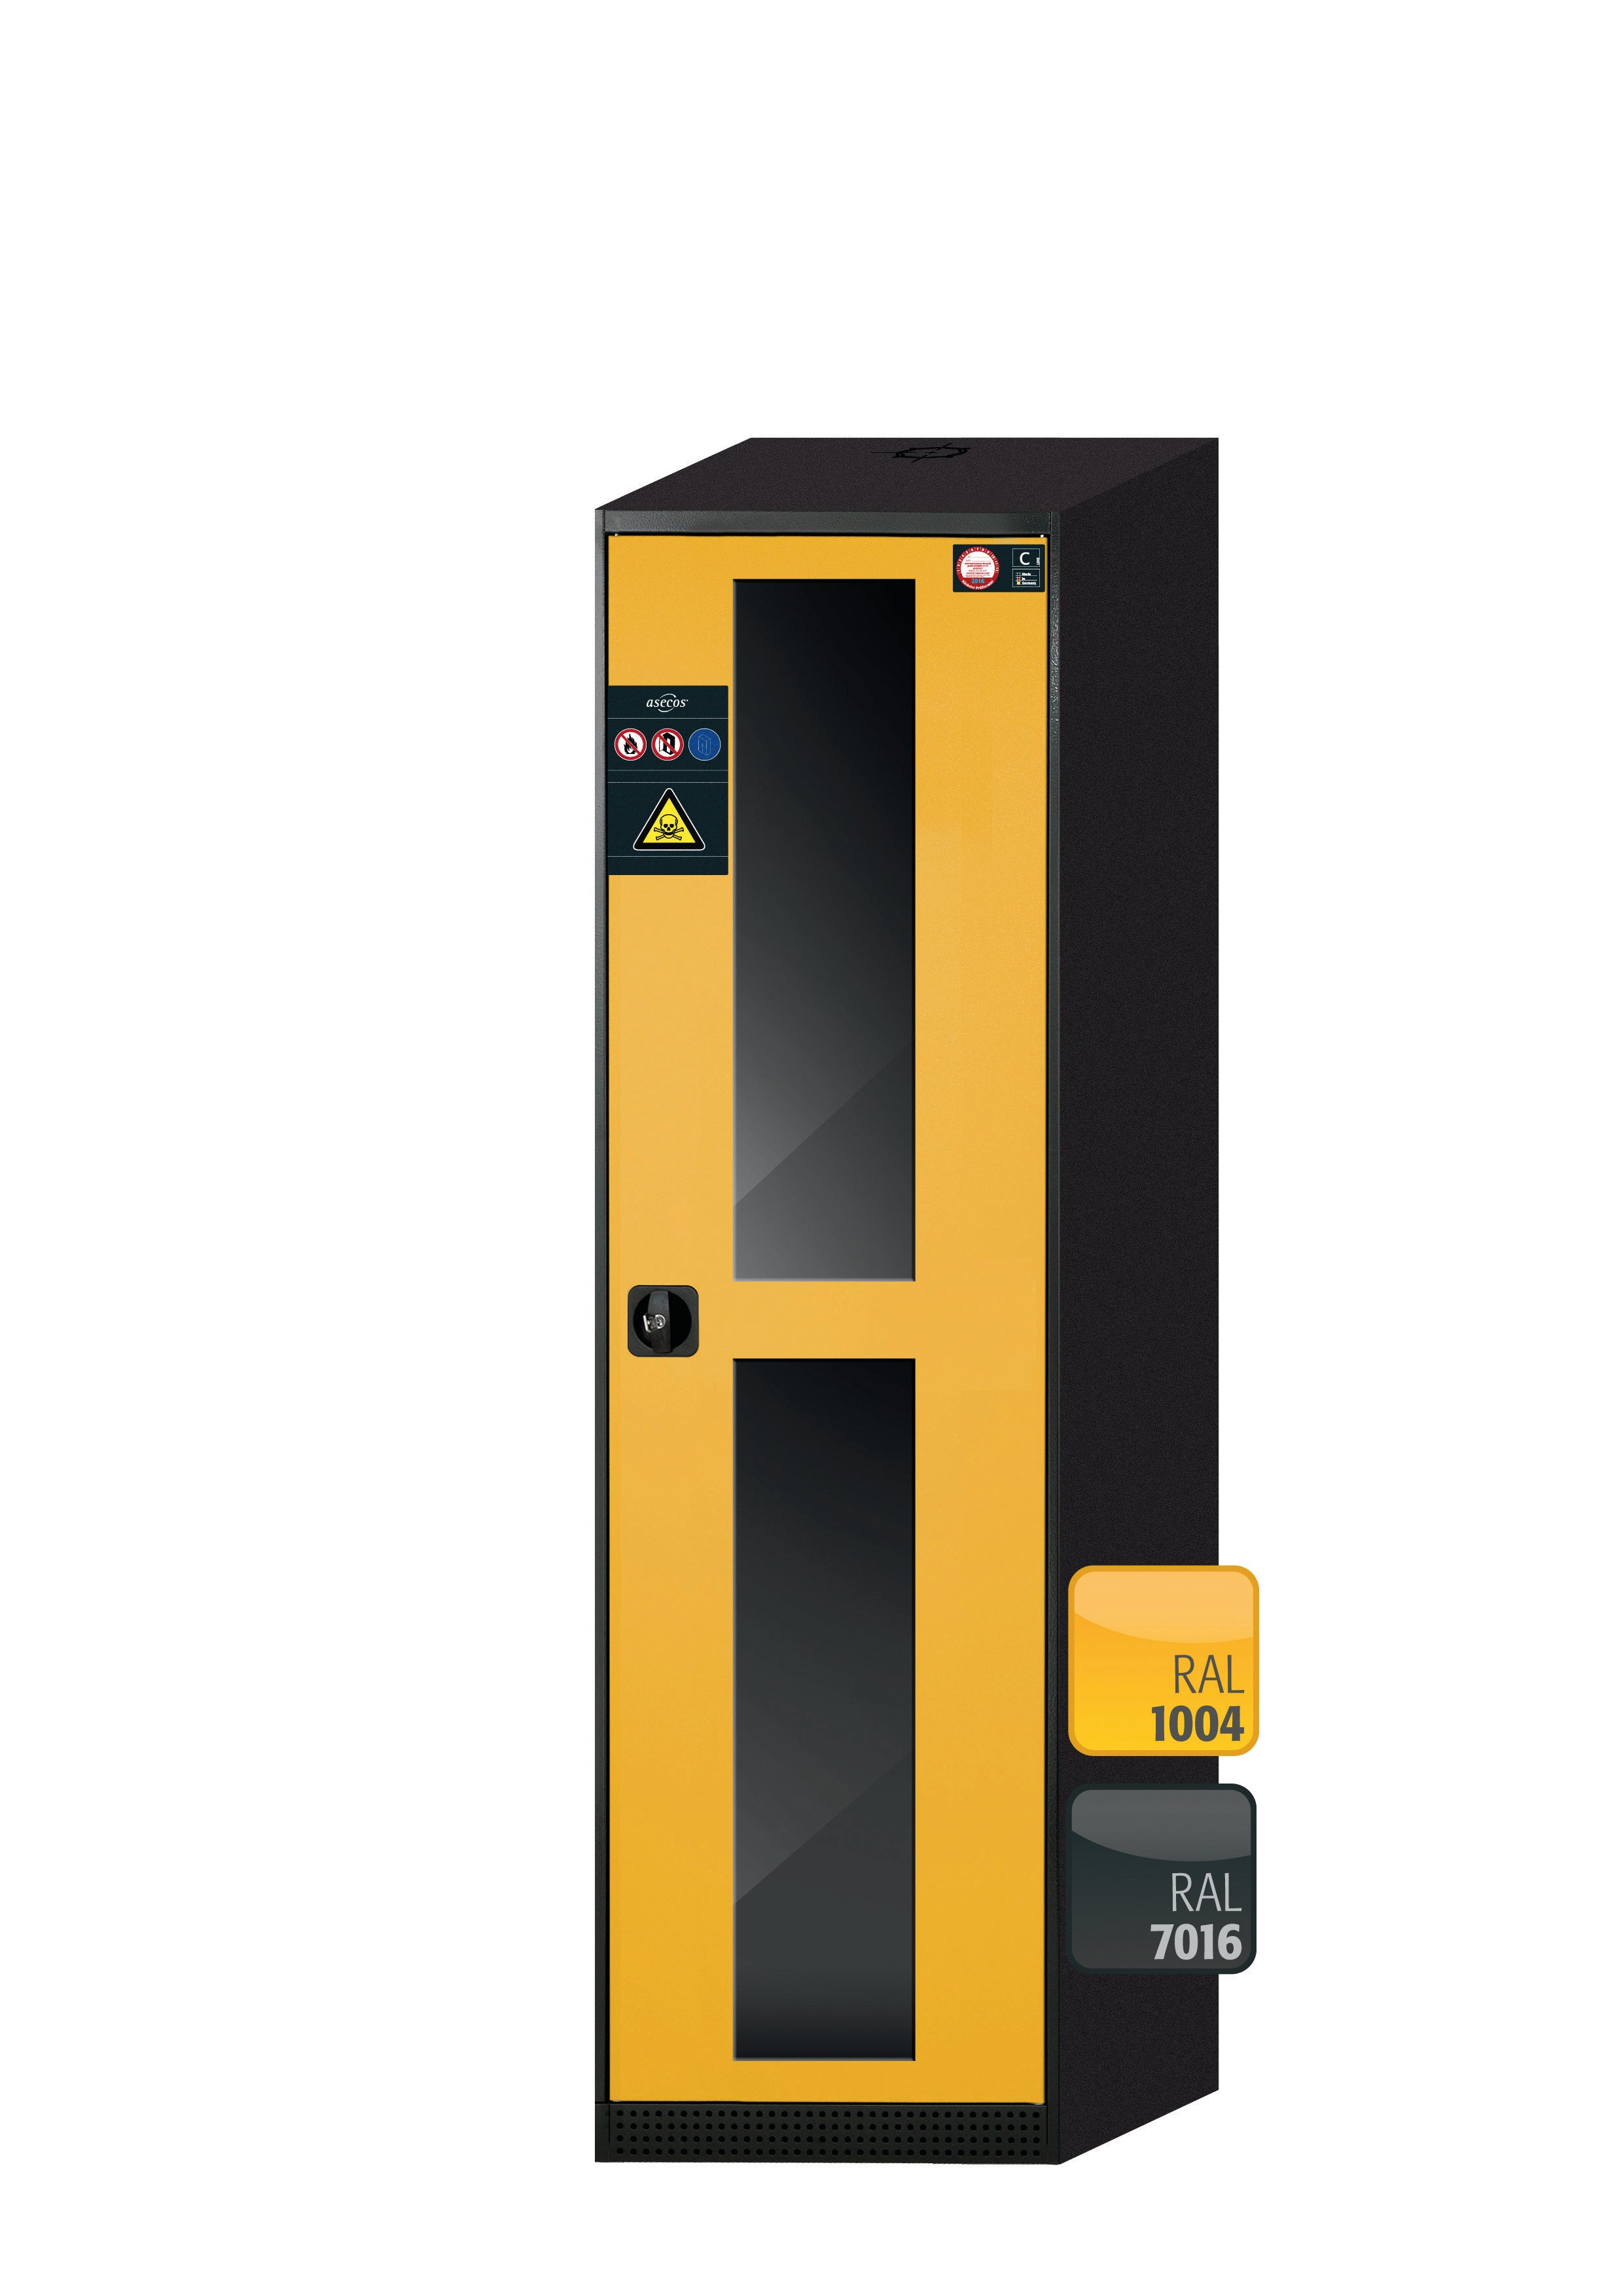 Chemical cabinet CS-CLASSIC-G model CS.195.054.WDFWR in safety yellow RAL 1004 with 6x AbZ shelf pull-outs (sheet steel/polypropylene)